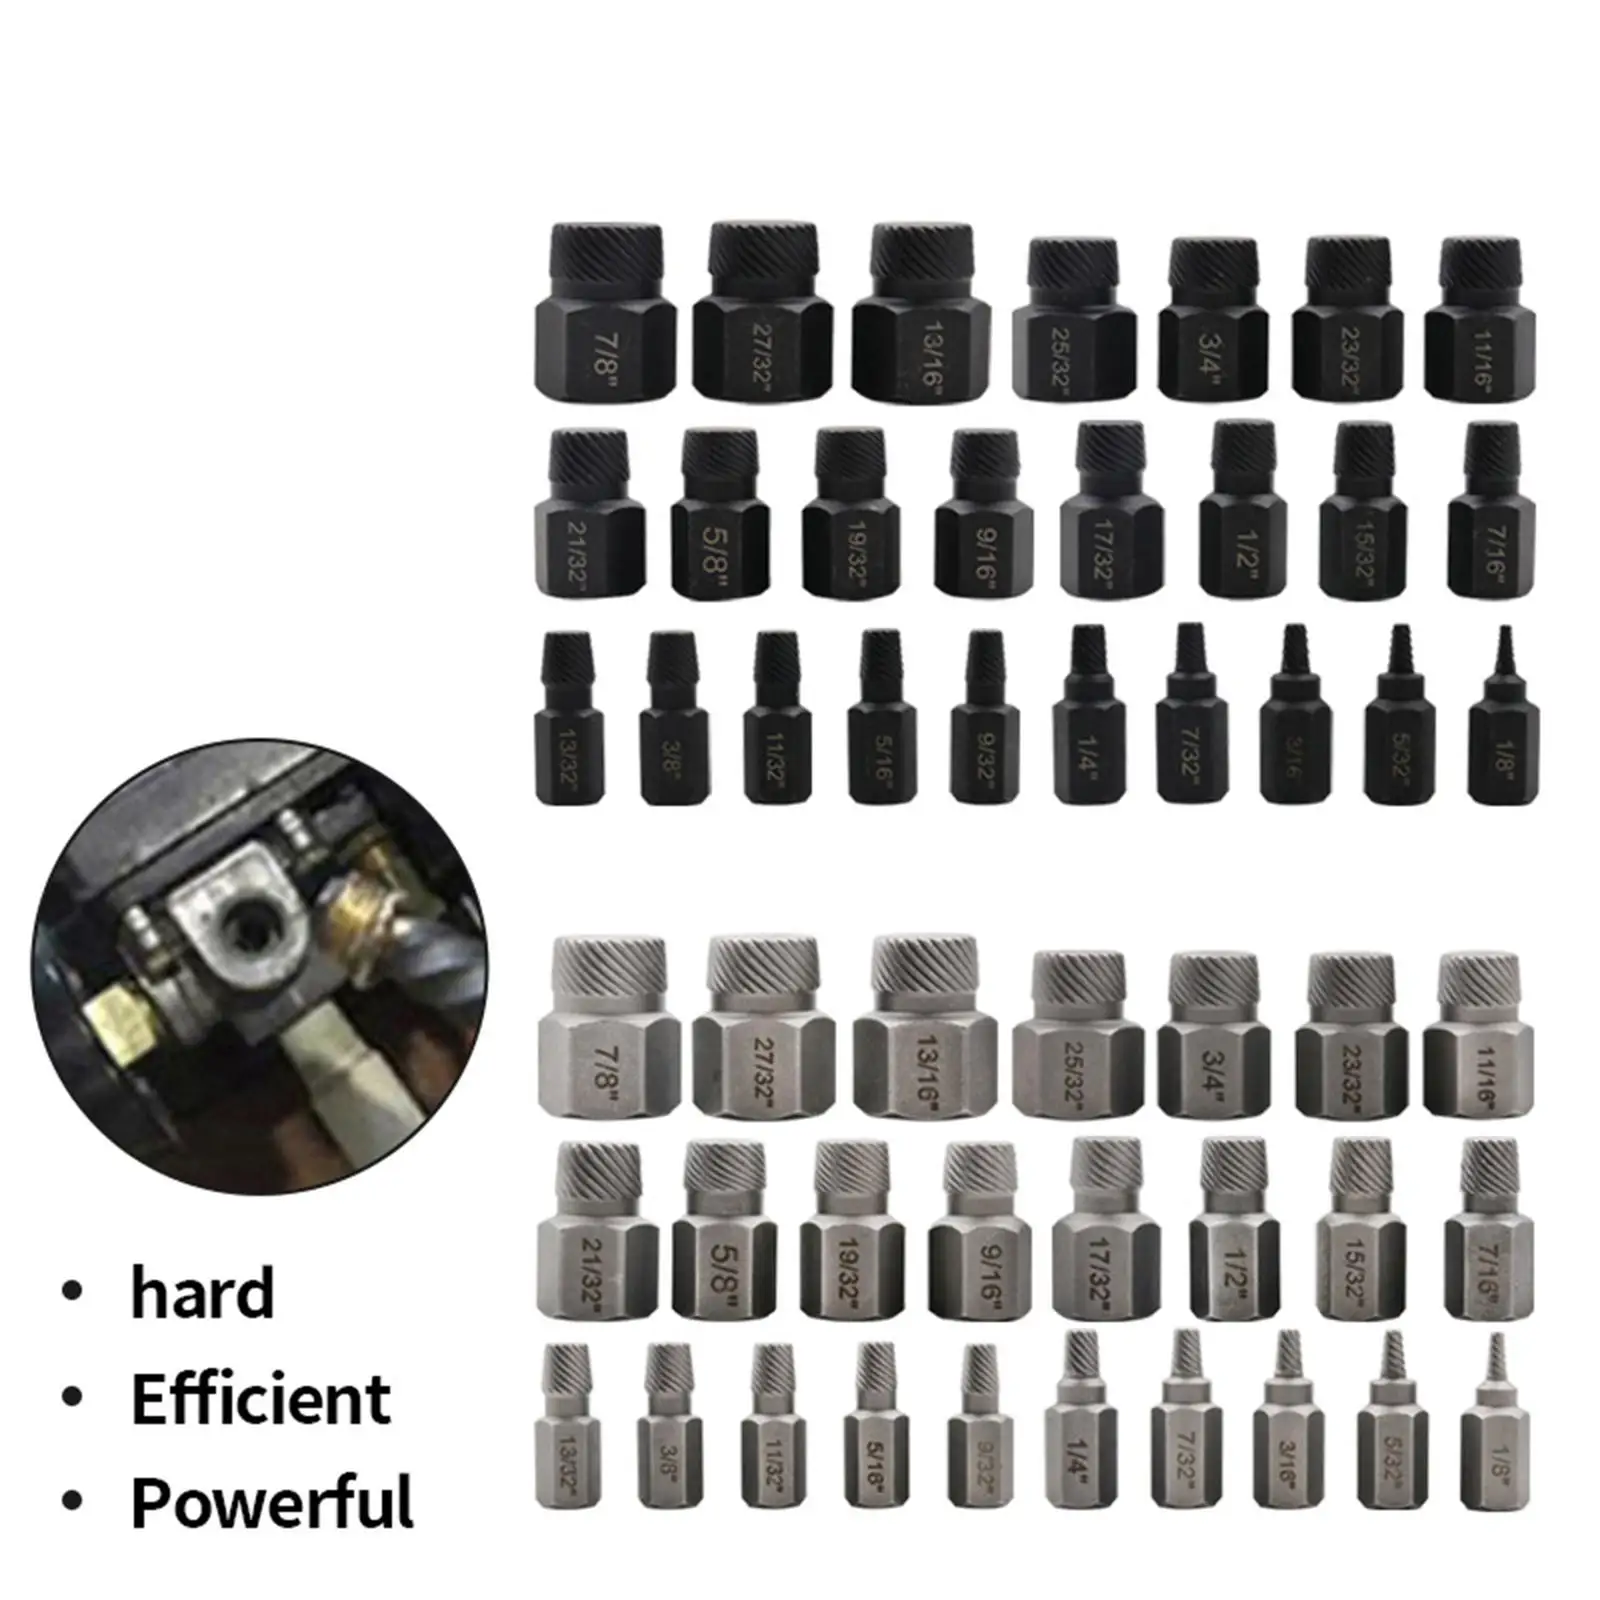 25 Pieces Steel Screw Remover Tool Bolt Extractor Set Hexagon Handle Stripped Bolts Remover for Removing Damaged Bolts Nuts